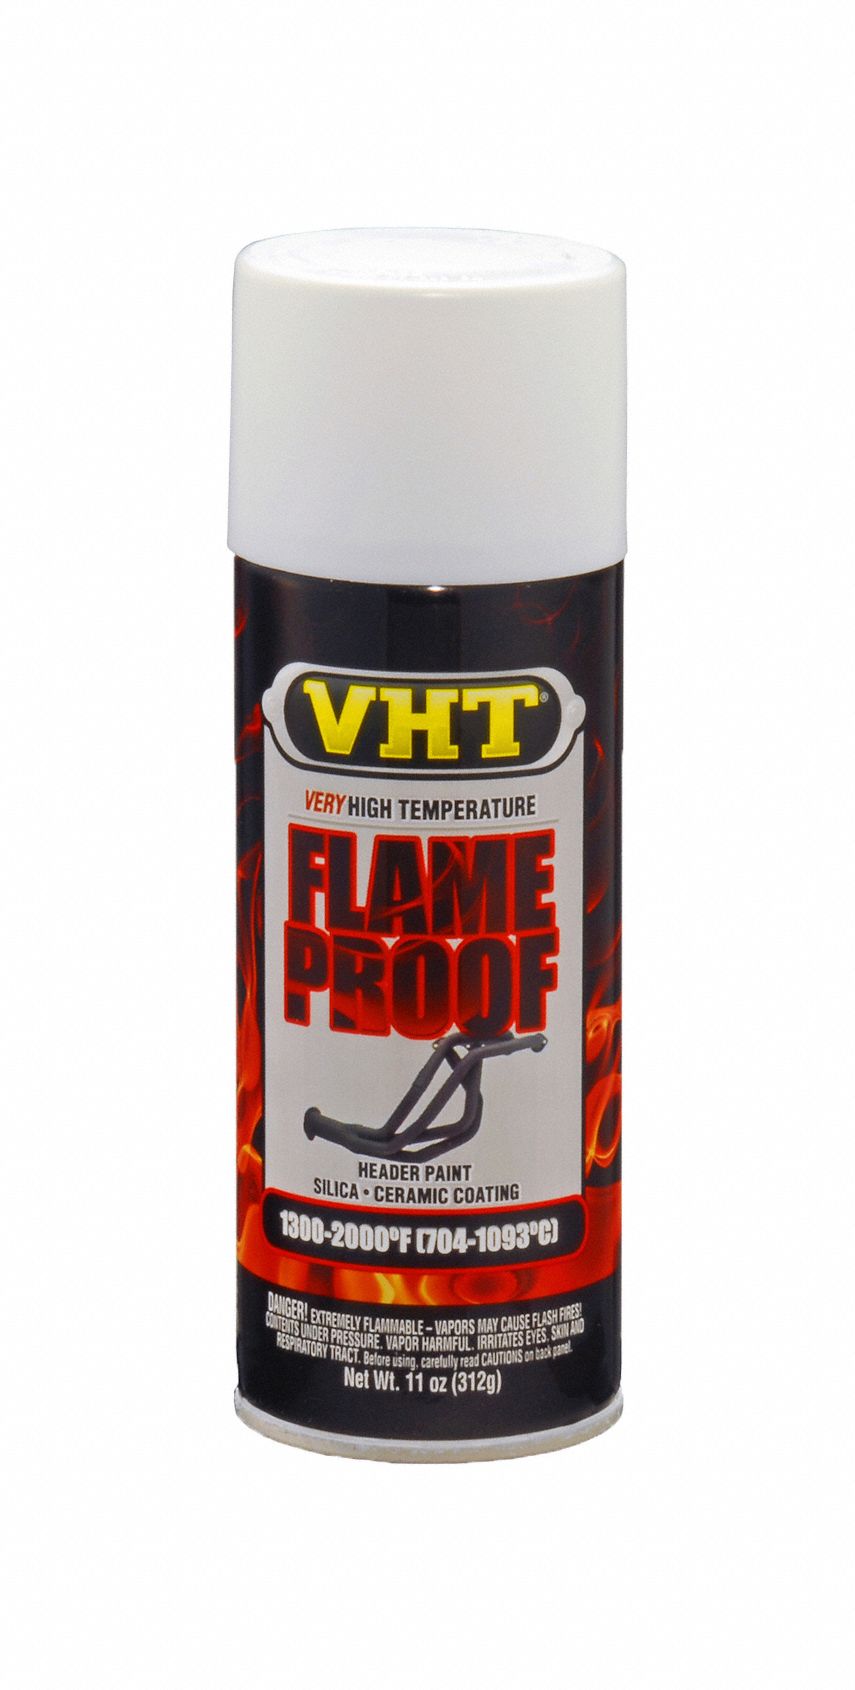 Flameproof Coating: Steel/Metal, Solvent, White, 11 oz Container, Flameproof, Heat Resistant